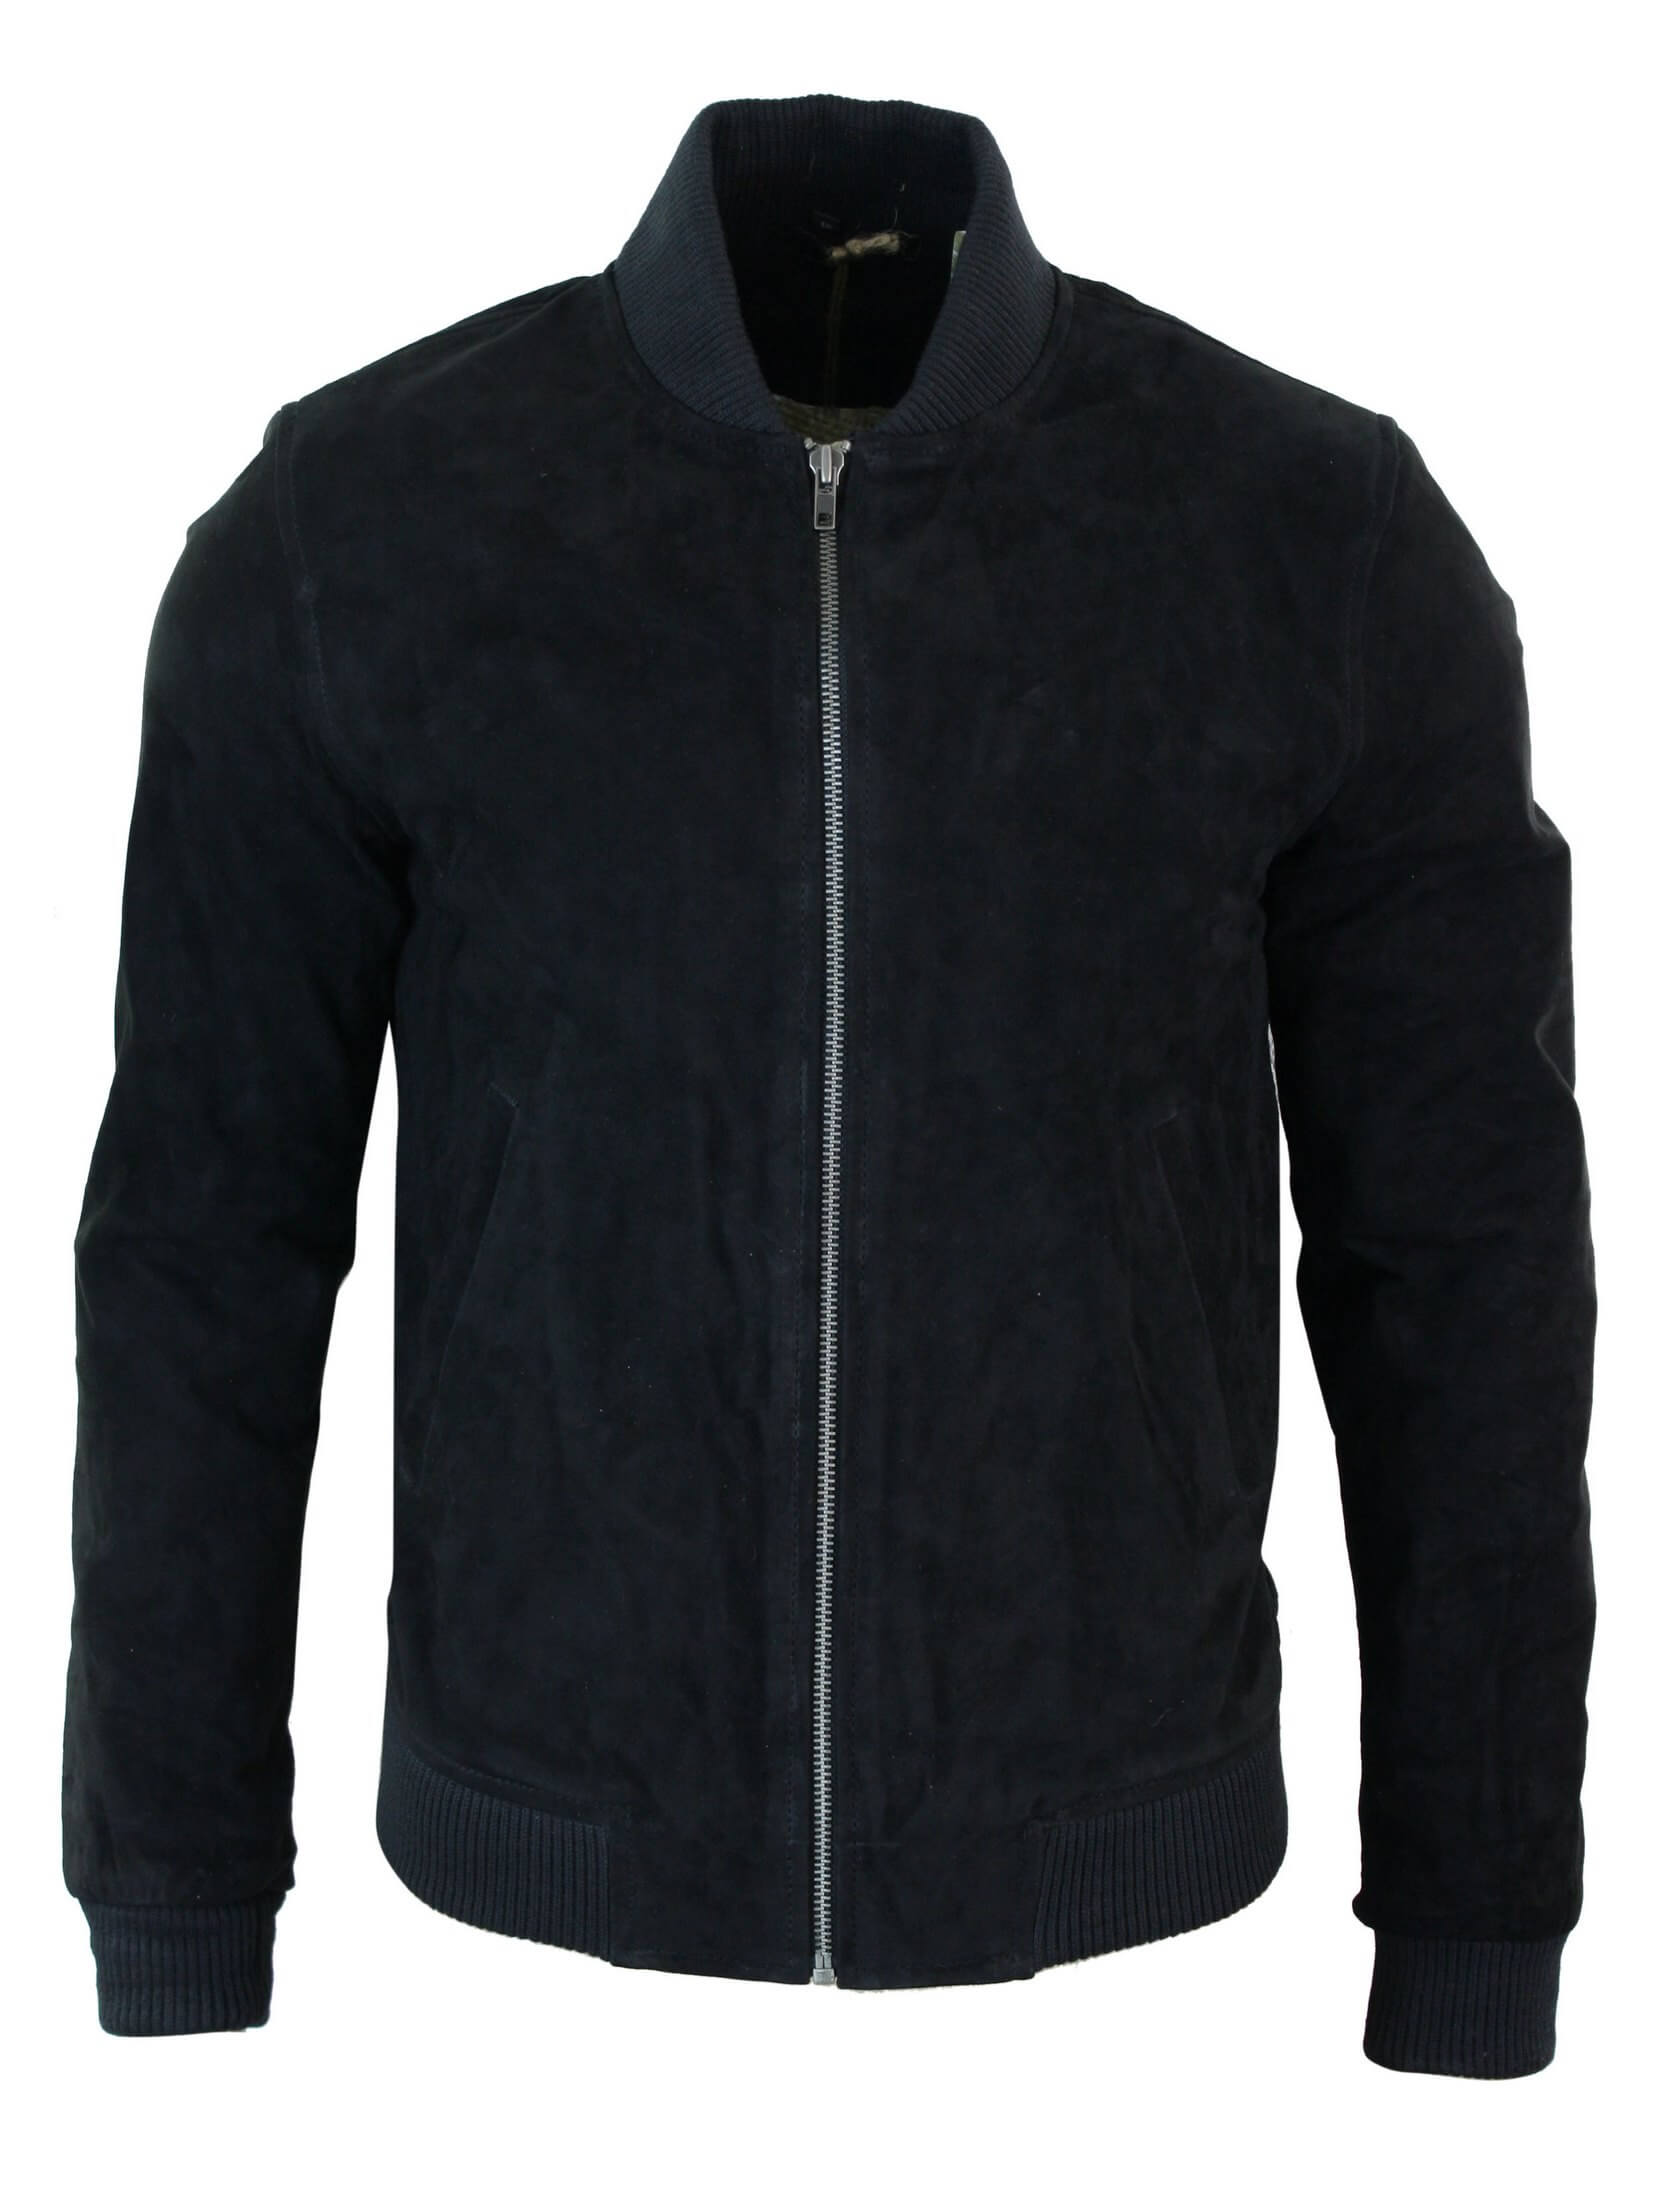 Leather Bomber Jackets : Buy Online - Happy Gentleman - United States